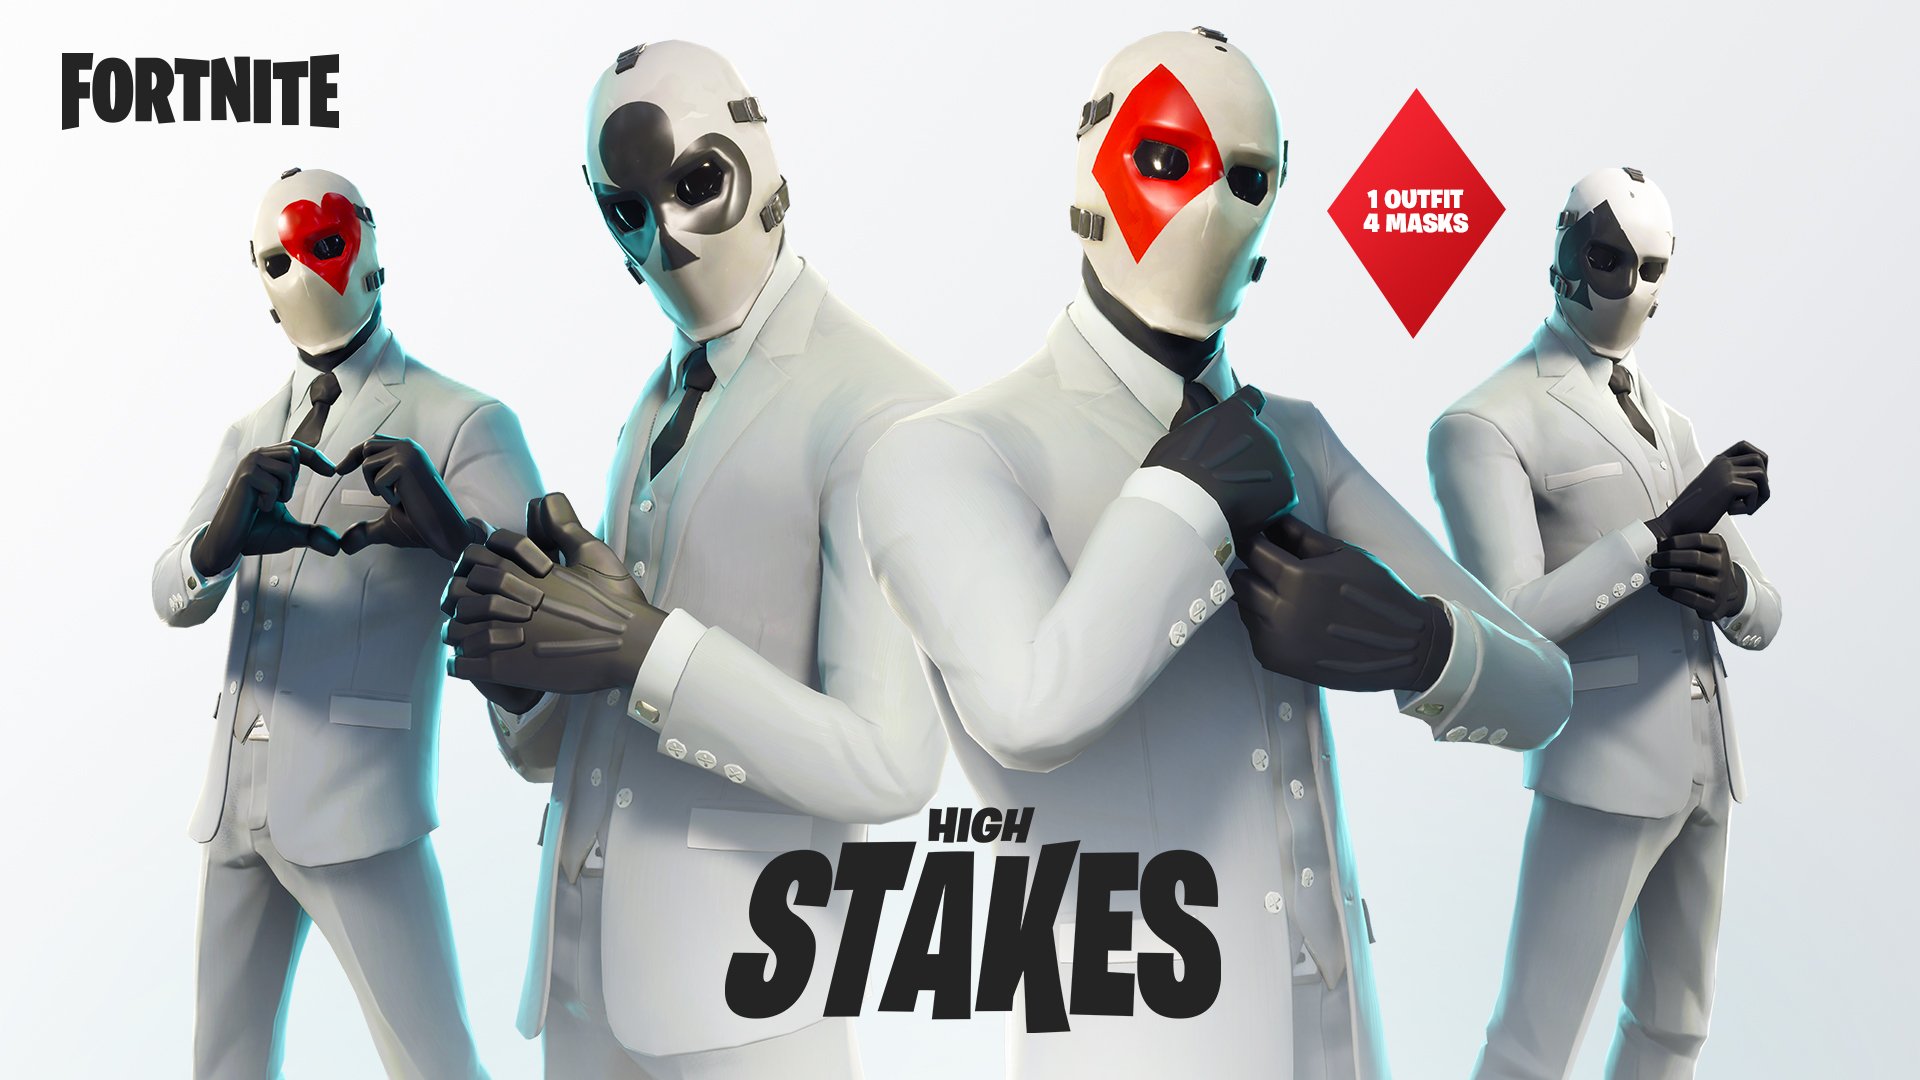 high stakes event getaway ltm new traversal item and more in fortnite battle royale update v5 4 fortnite news and statistics ss1 - fortnite party services